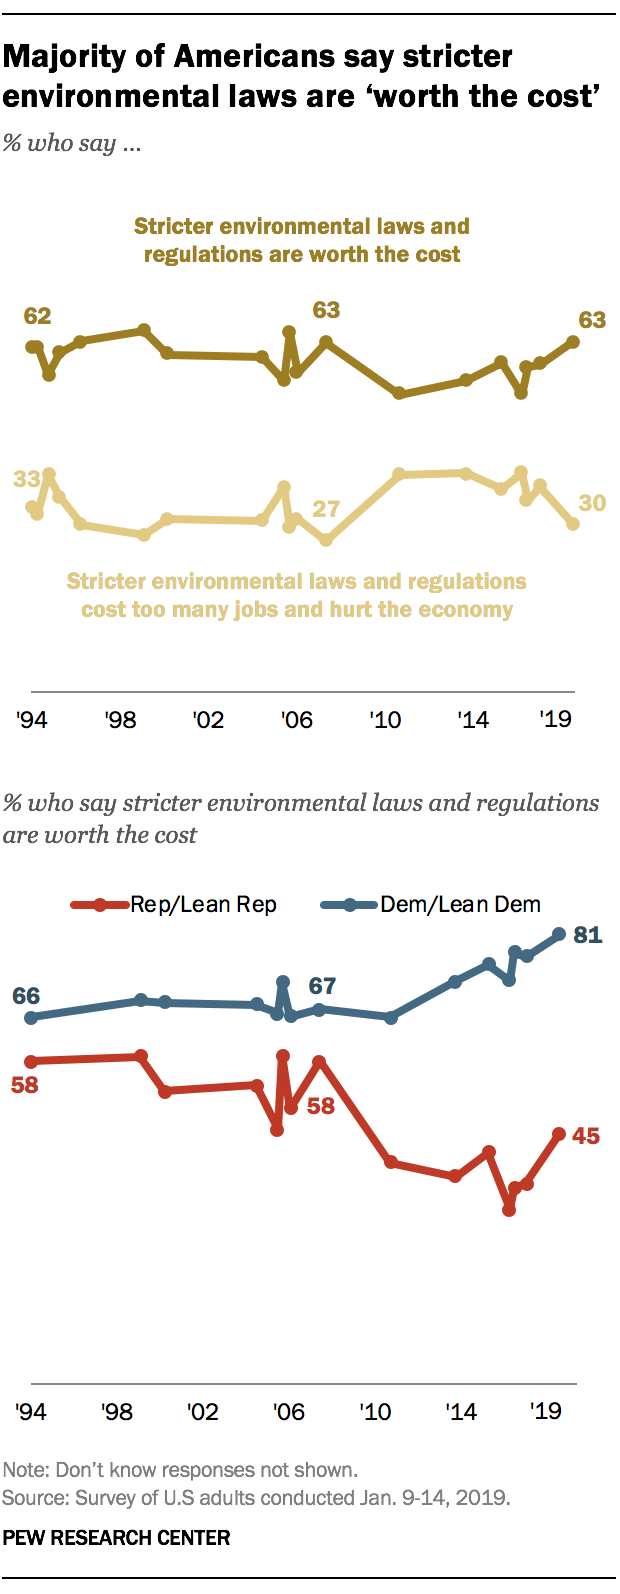 Majority of Americans say stricter environmental laws are 'worth the cost'